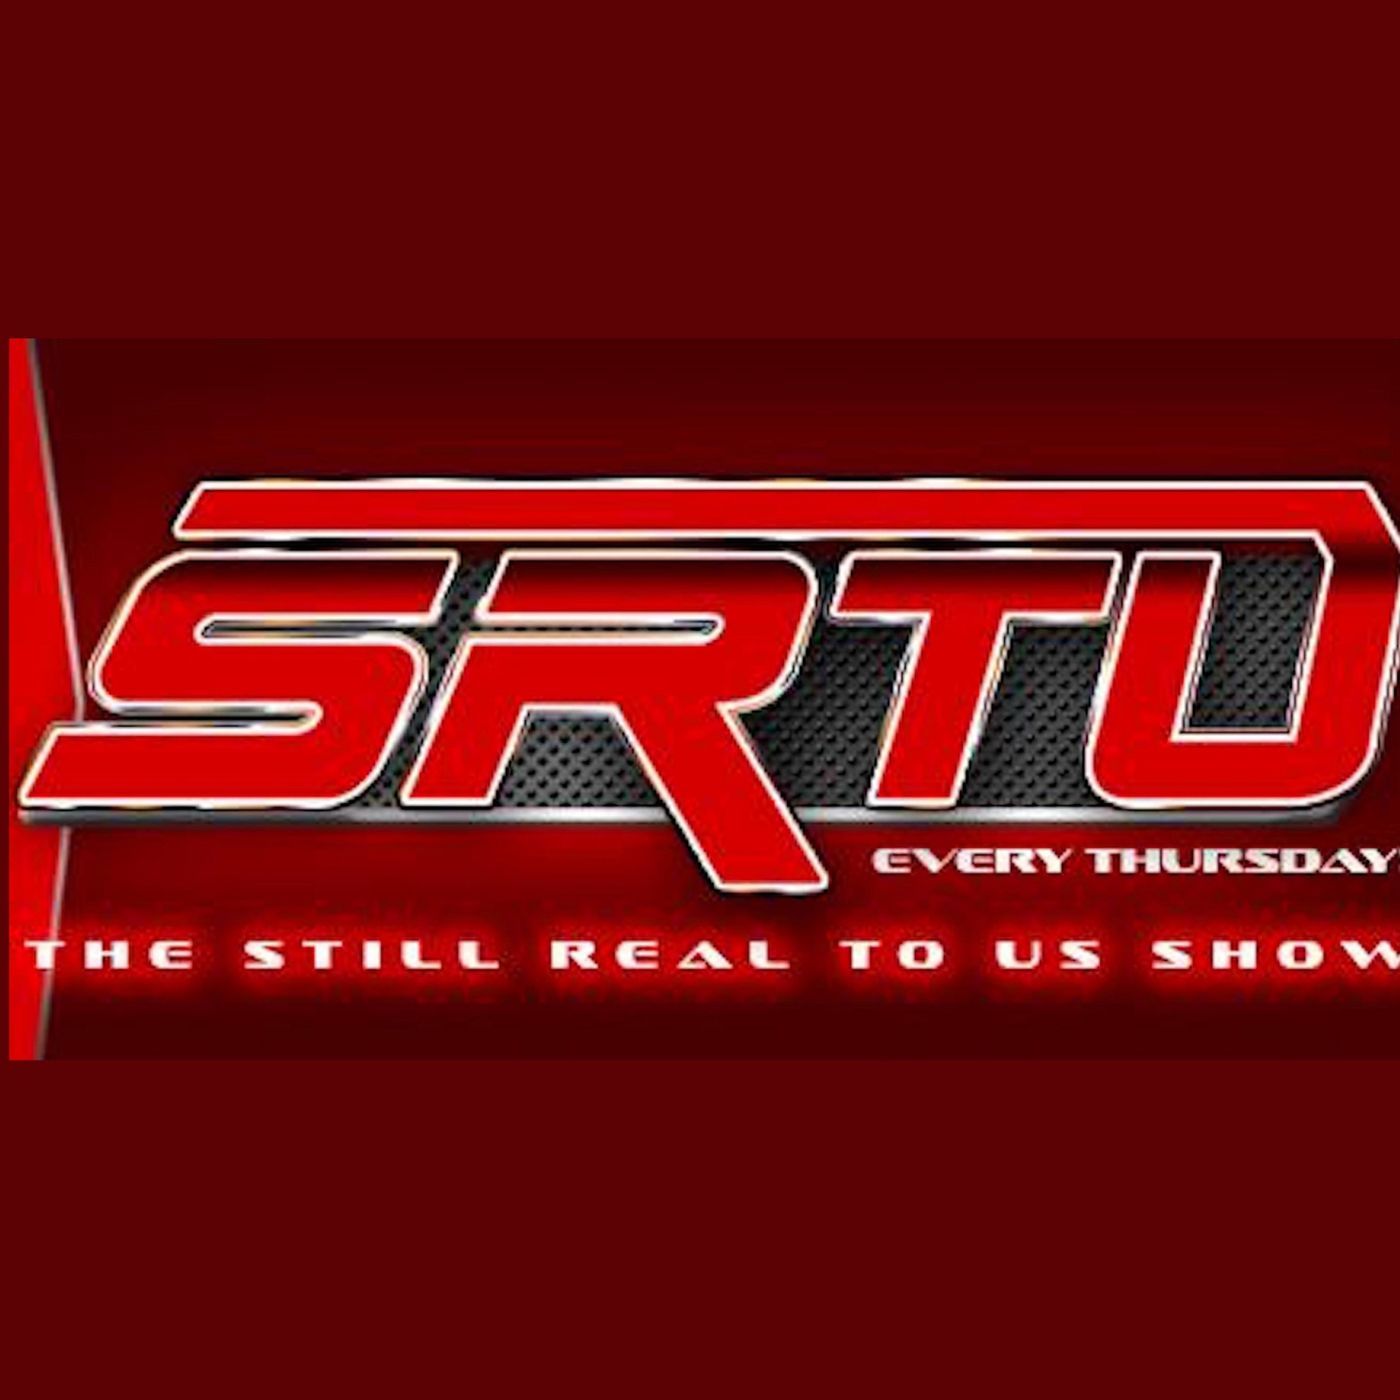 The Still Real to Us Show: Episode #624 – 1/27/22